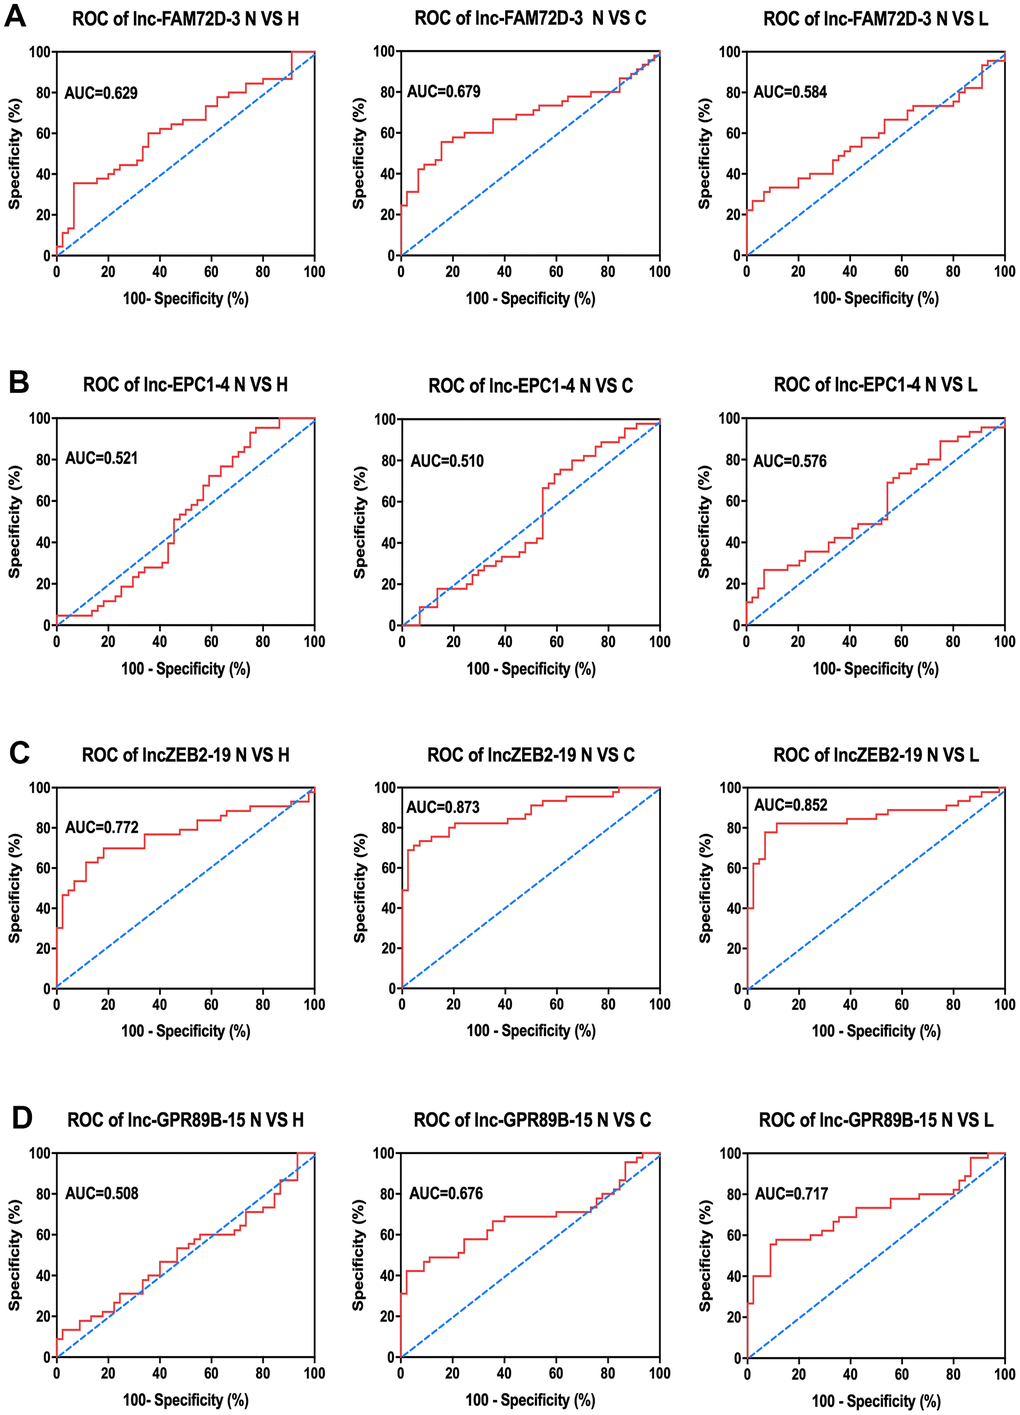 Clinical analysis of AUC of (A) lnc-FAM72D-3, (B) lnc-EPC1-4, (C) lnc-ZEB2-19, and (D) lnc-GPR89B-15 in the control group compared to hepatitis, cirrhosis, and HCC groups. N VS H, normal versus hepatitis; N VS C, normal versus cirrhosis; N VS L, normal versus HCC; AUC, area under the curve; ROC, receiver operating characteristic; HCC, hepatocellular carcinoma.